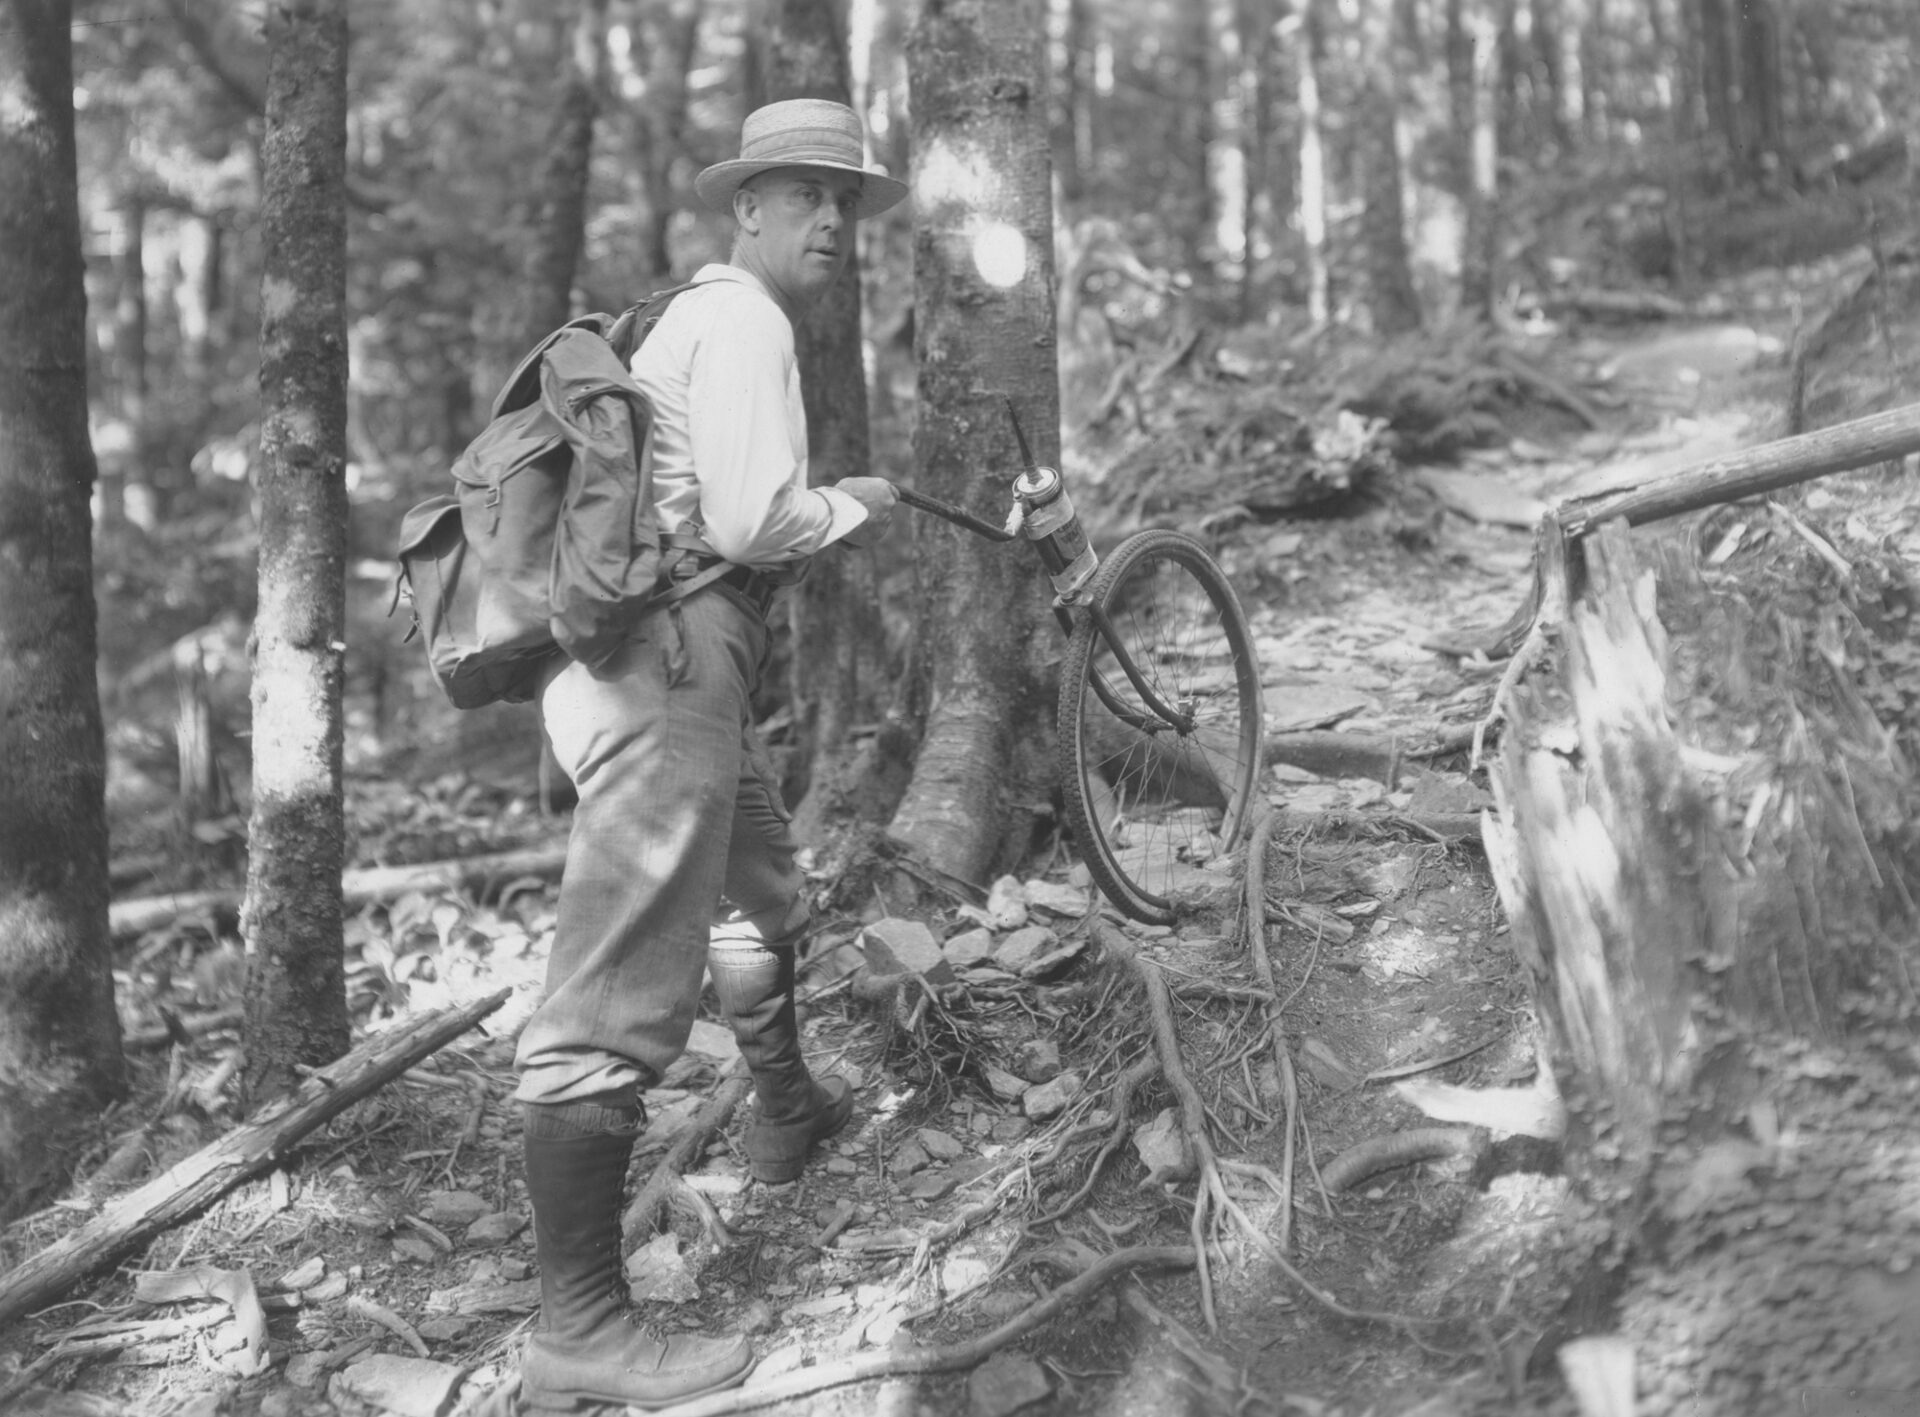 Jim Thompson marking the Appalachian Trail, late 1920s (University of Tennessee Libraries)